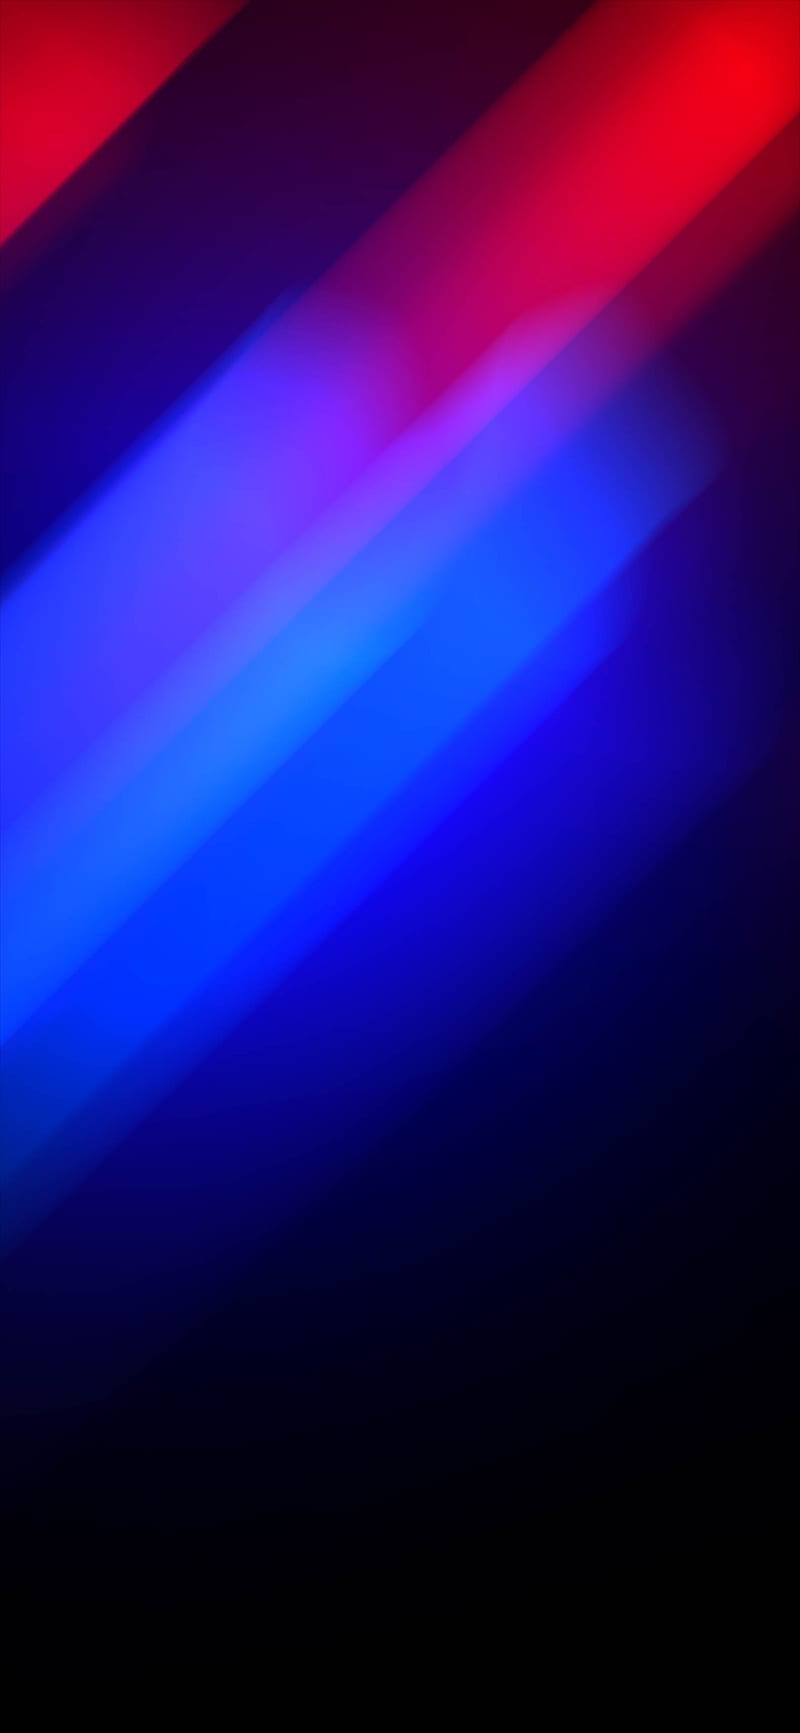 Gradient Abstract, amoled, blue, colorful, dark, oled, red, space, surreal, HD phone wallpaper